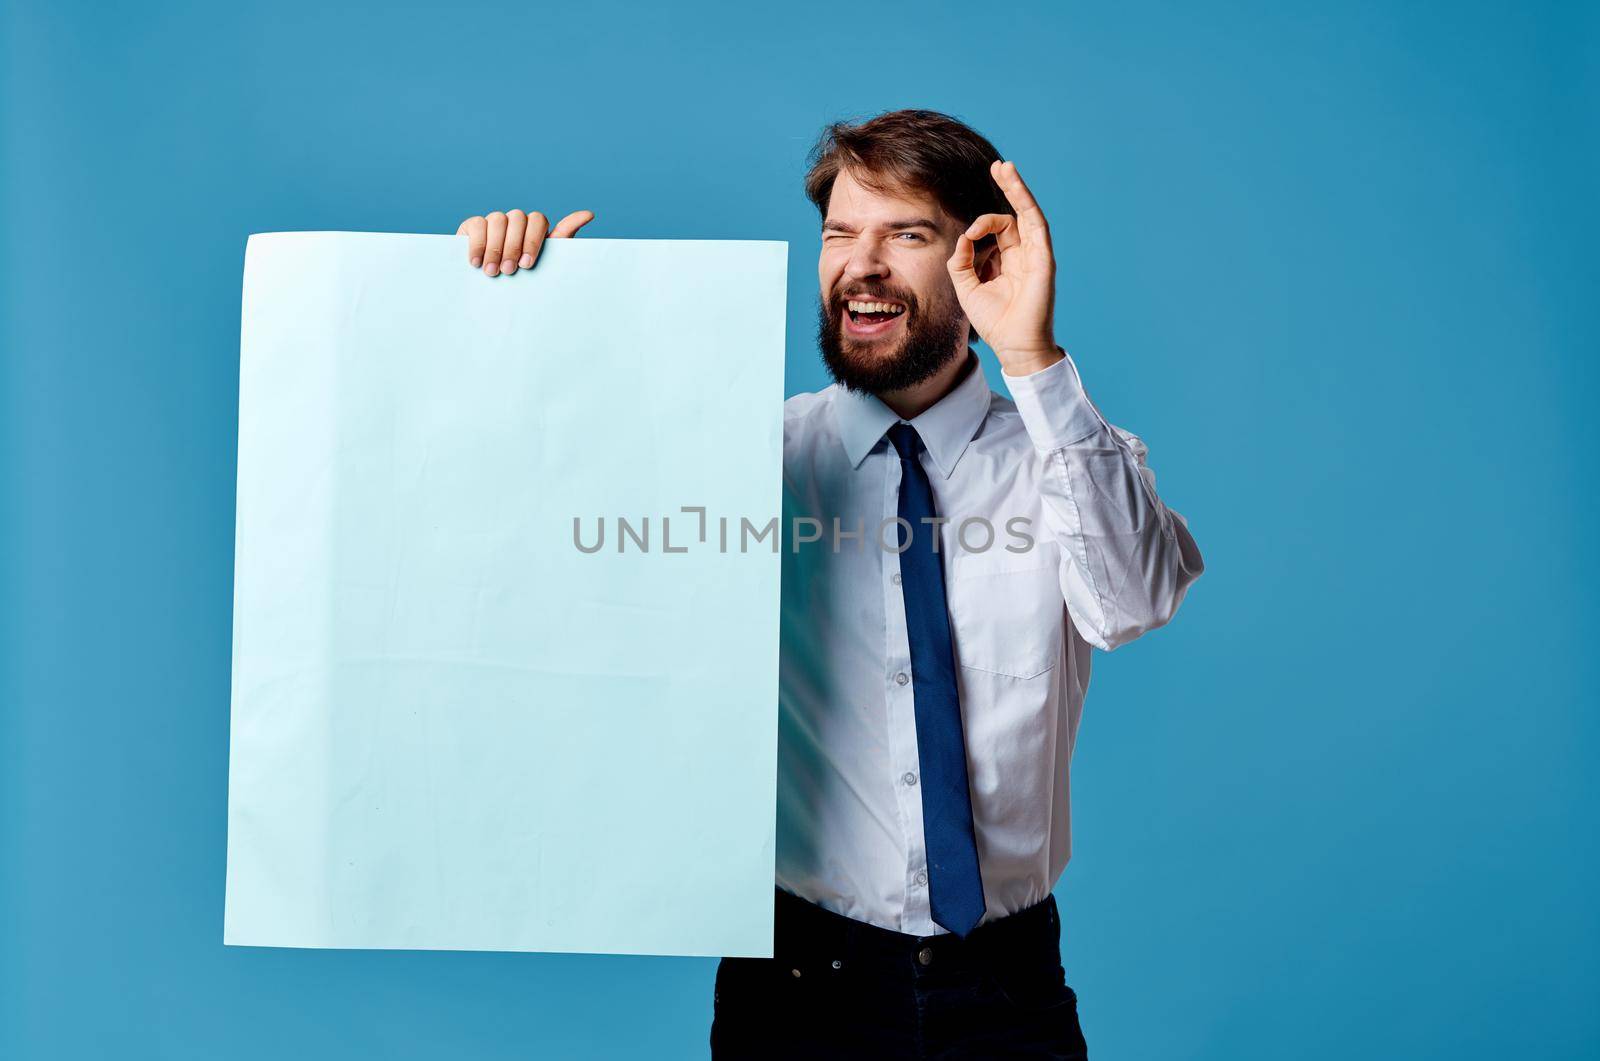 man in shirt with tie banners in the hands of an official advertising marketing. High quality photo